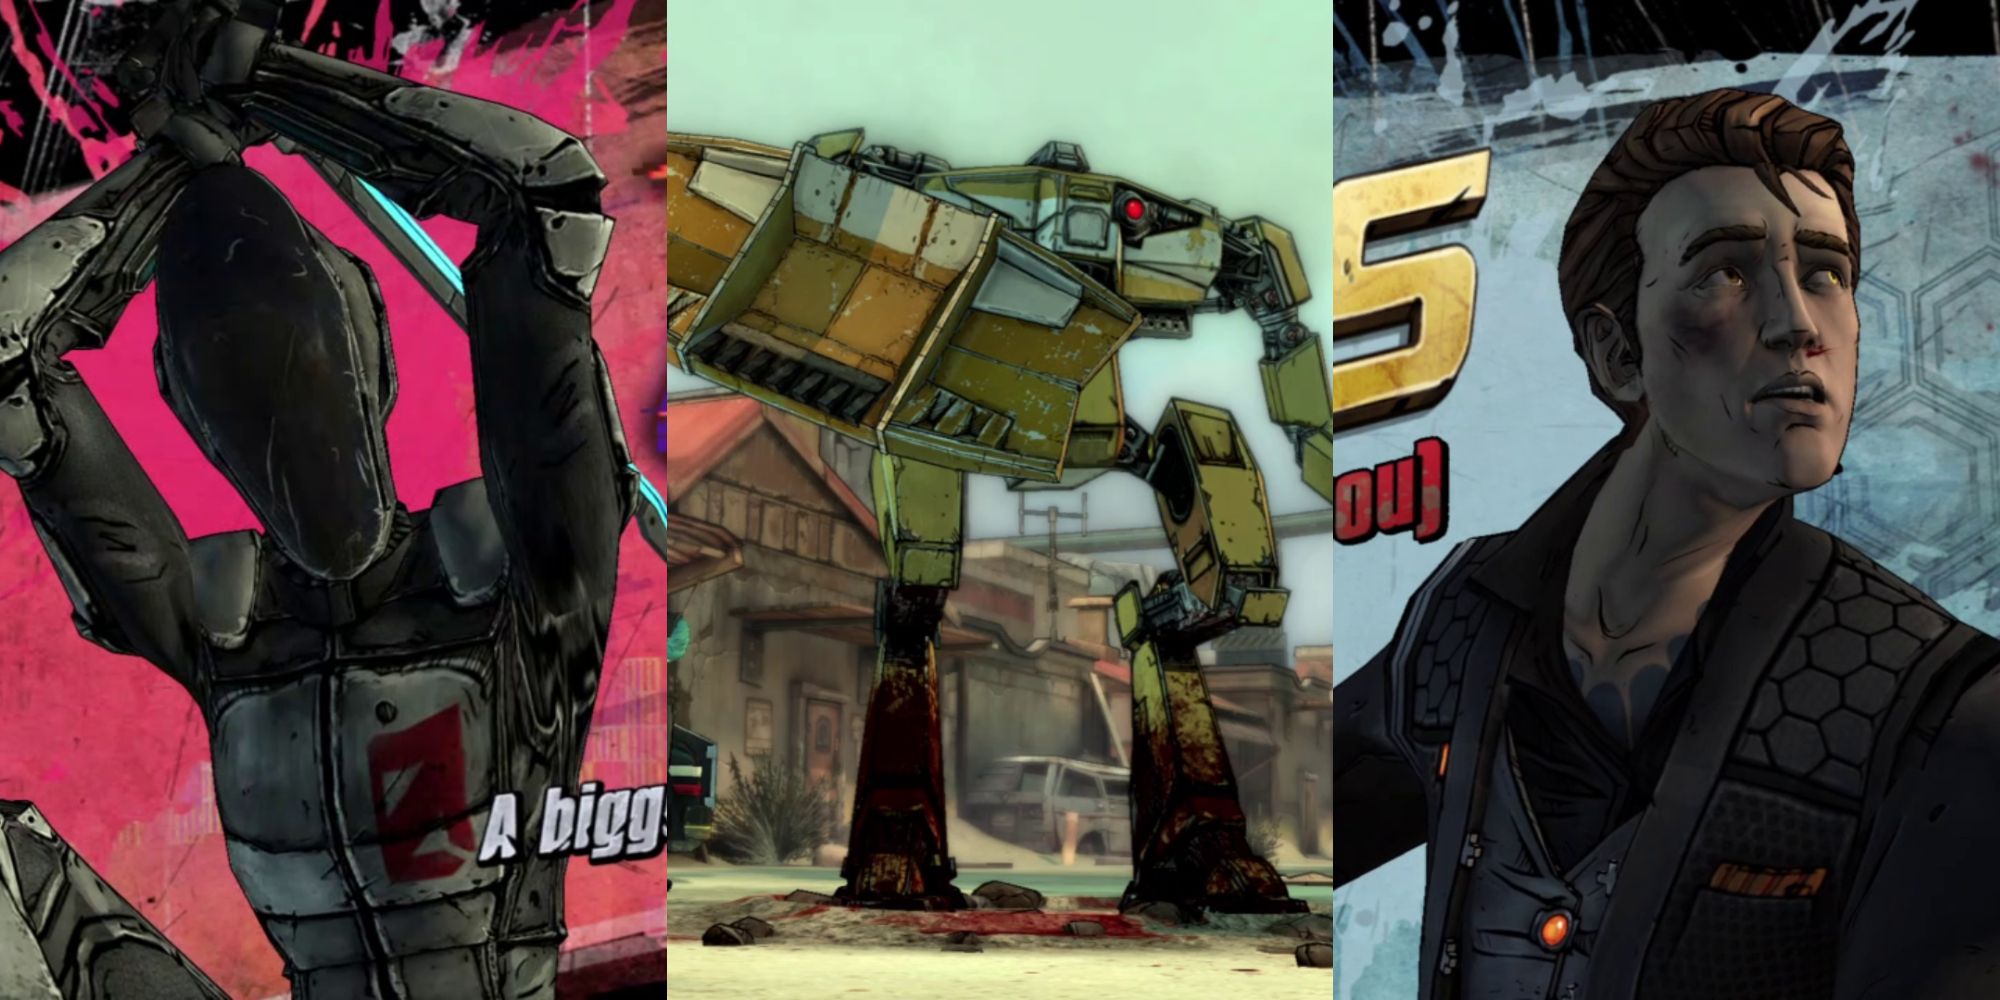 a ninja in a long, black mask swings a sword over his head; a yellow robot with a bulldozer arm stands in a town square; a man with styled hair and an all black outfit with orange lights in it reels from a punch